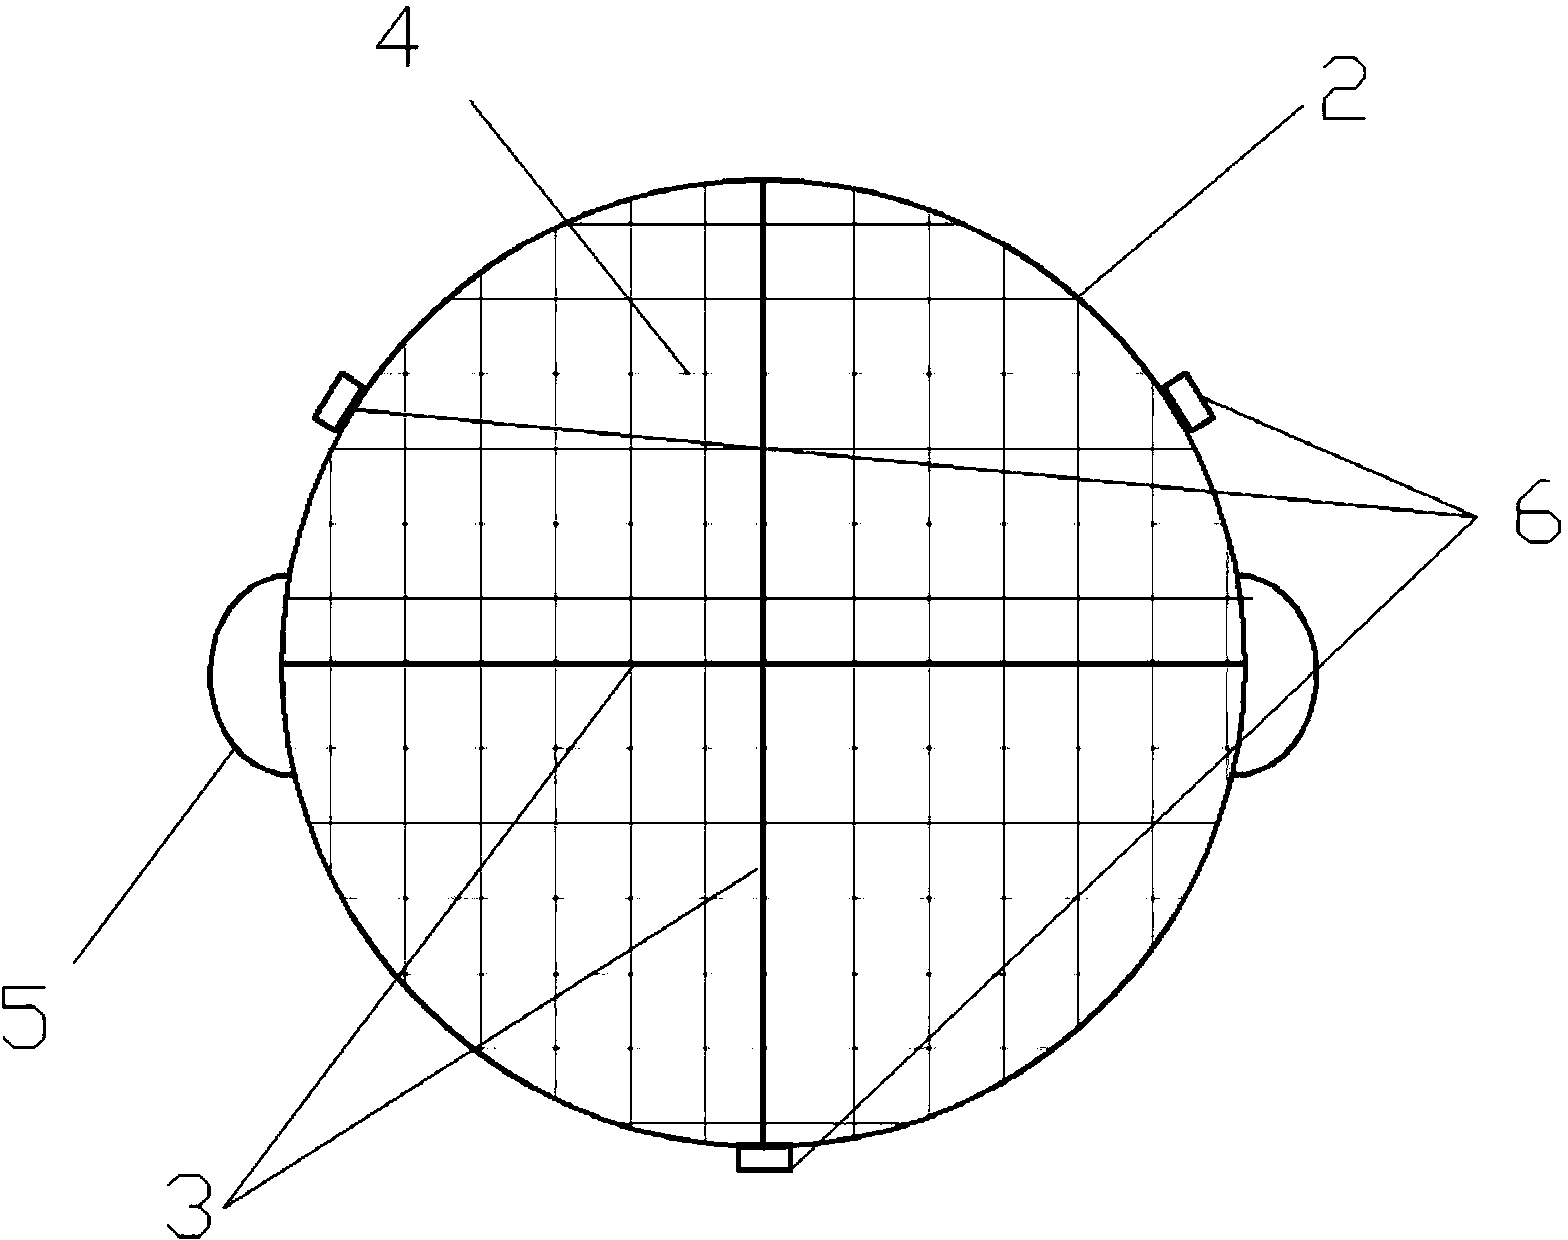 Greening device and method for non-hole manhole cover